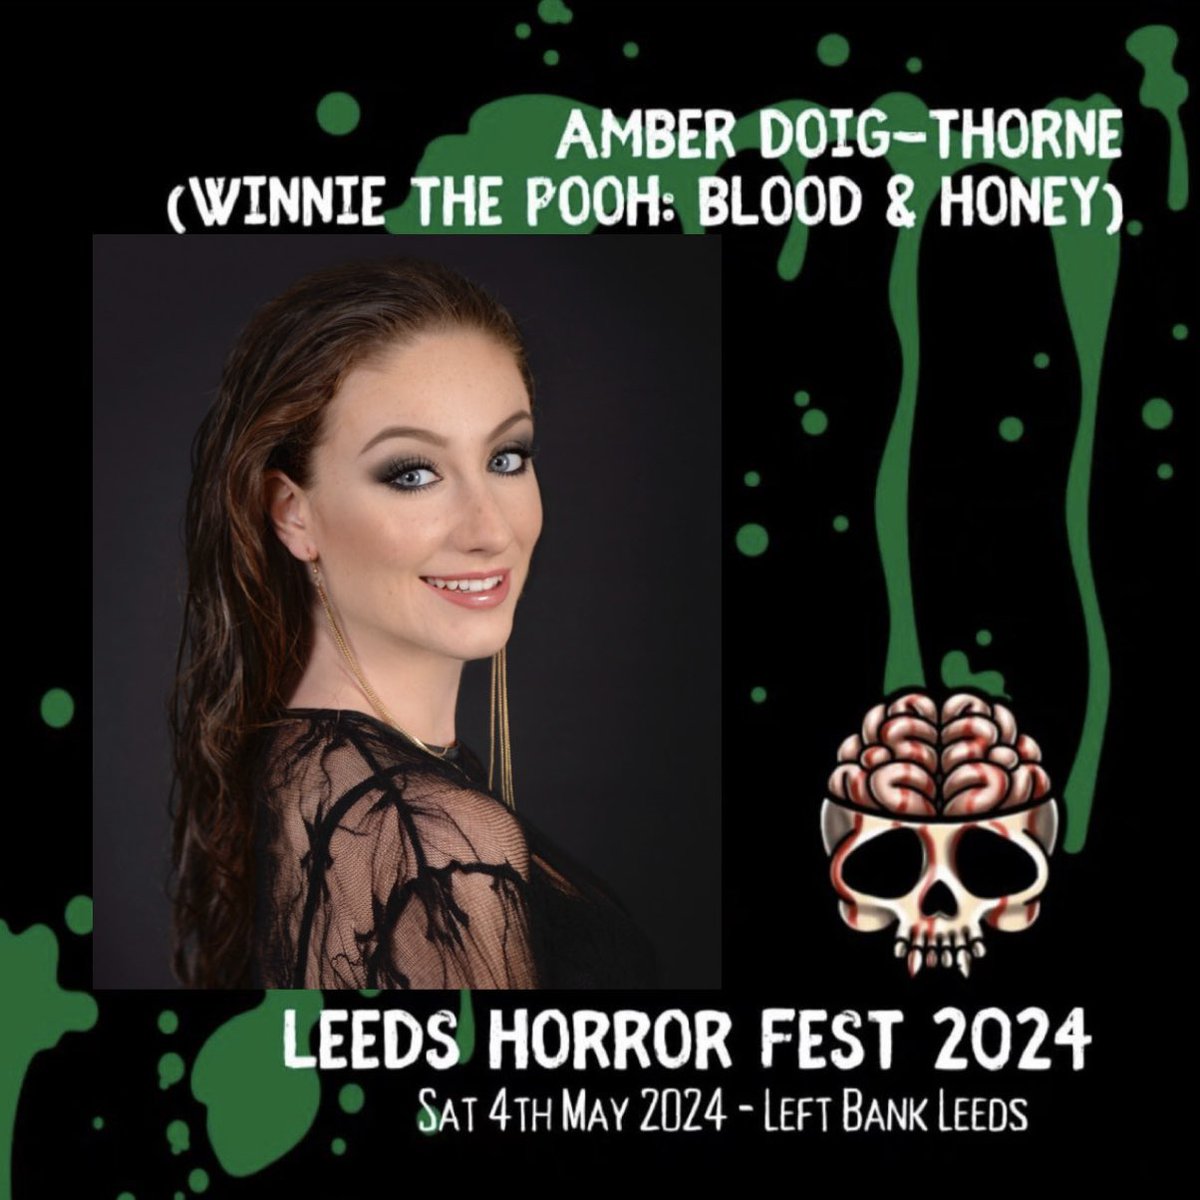 I’ll be at Leeds Horror Fest this Saturday 4th May 🙌🏻 If you see me - come & say hi 💙